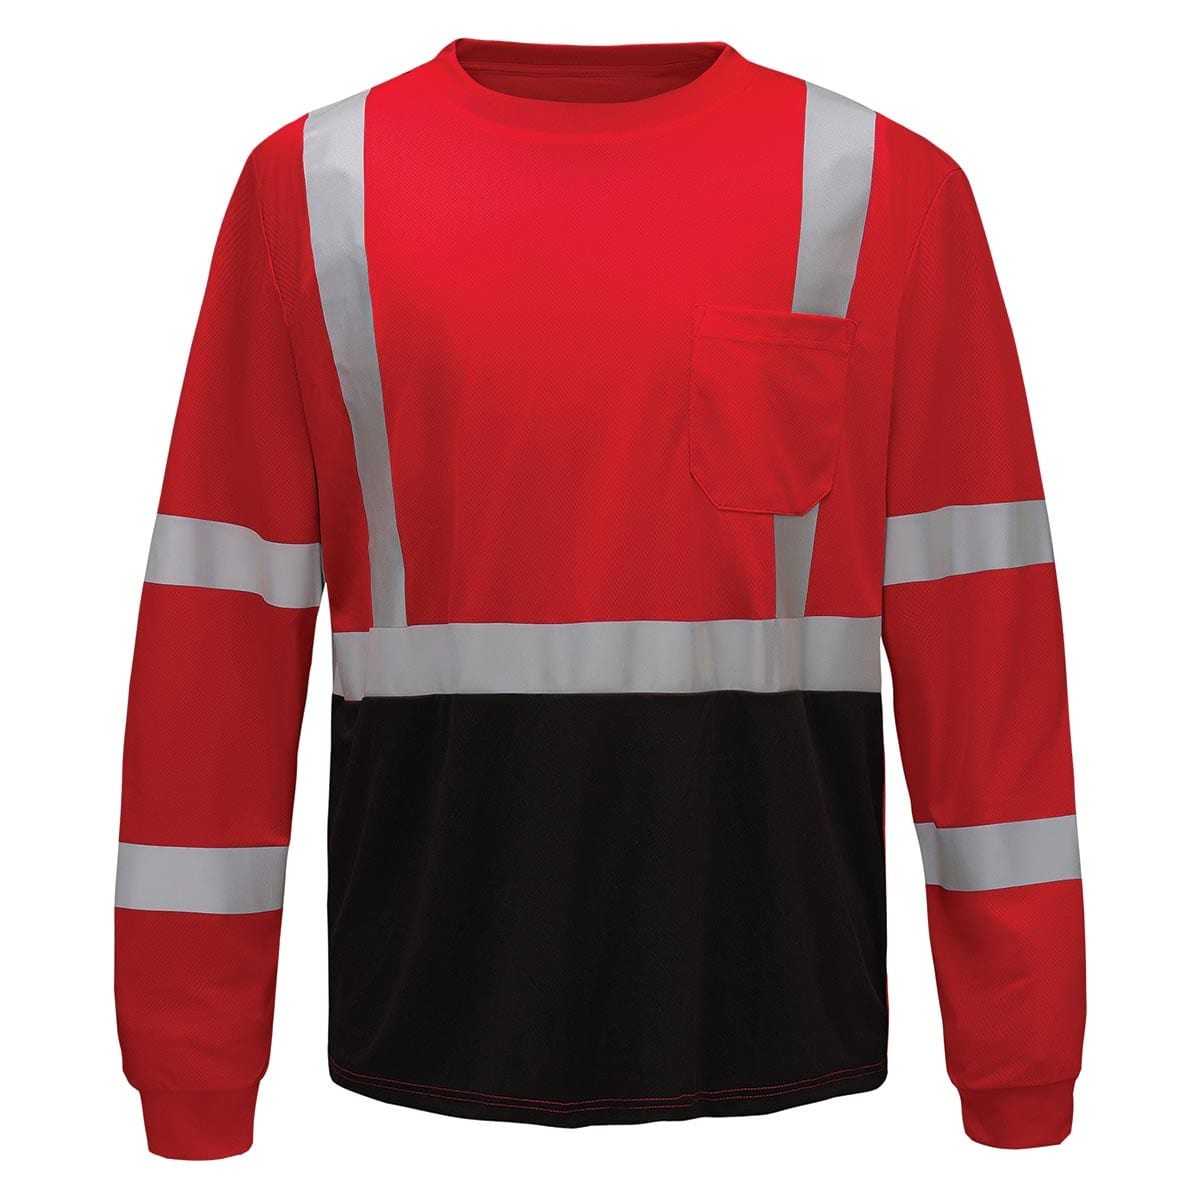 GSS Safety Non-ANSI Long Sleeve Enhanced Visibility Shirt with Reflective Tape